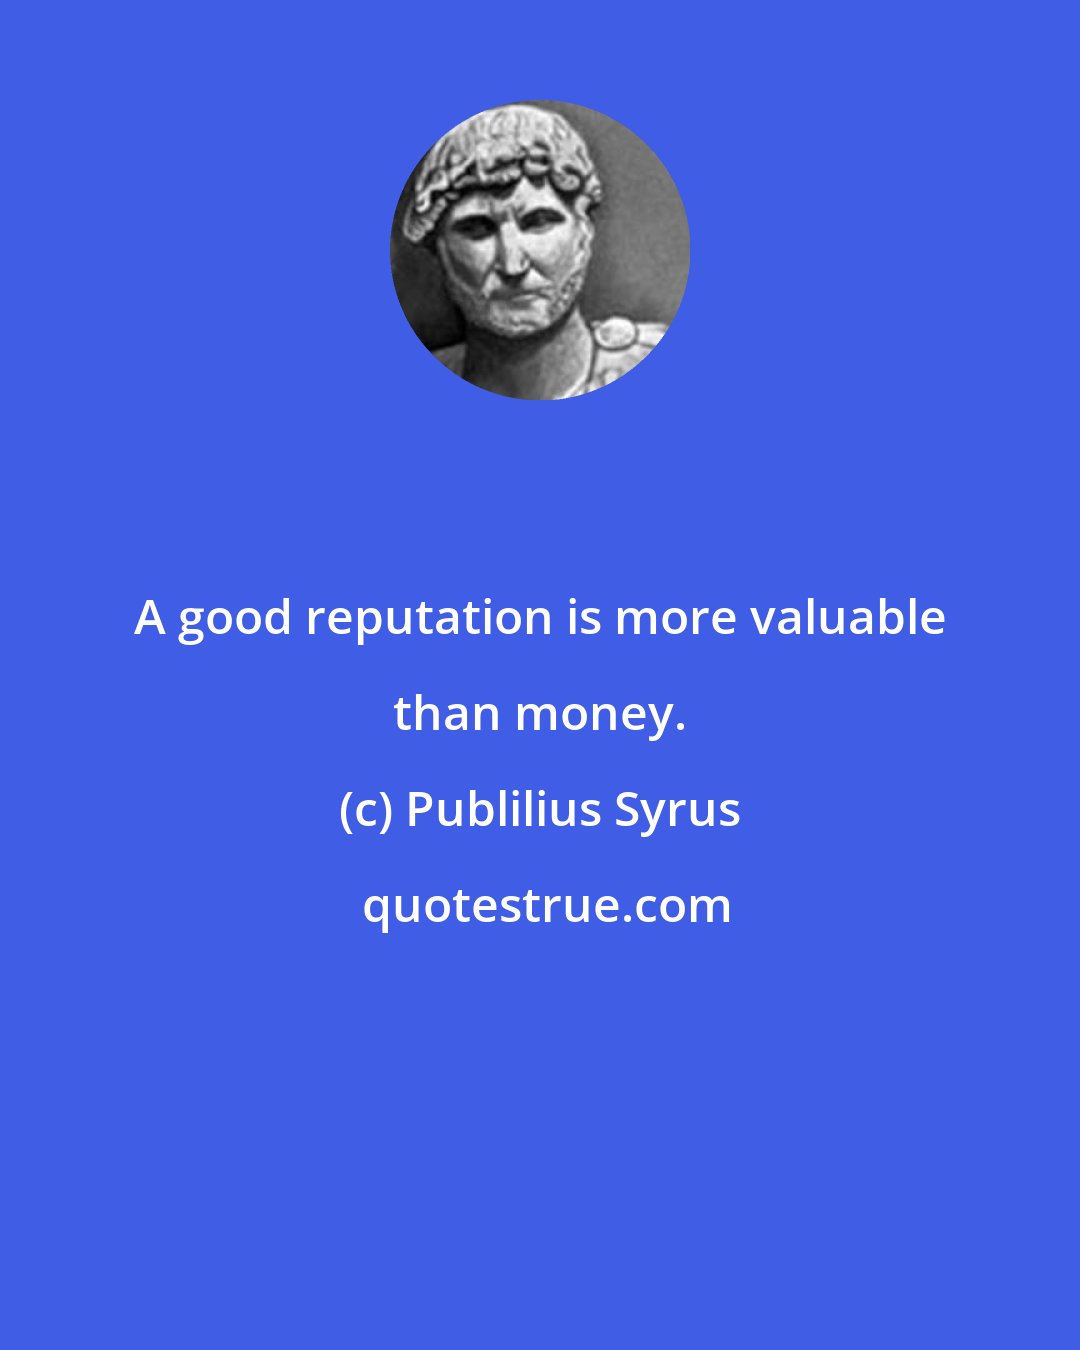 Publilius Syrus: A good reputation is more valuable than money.